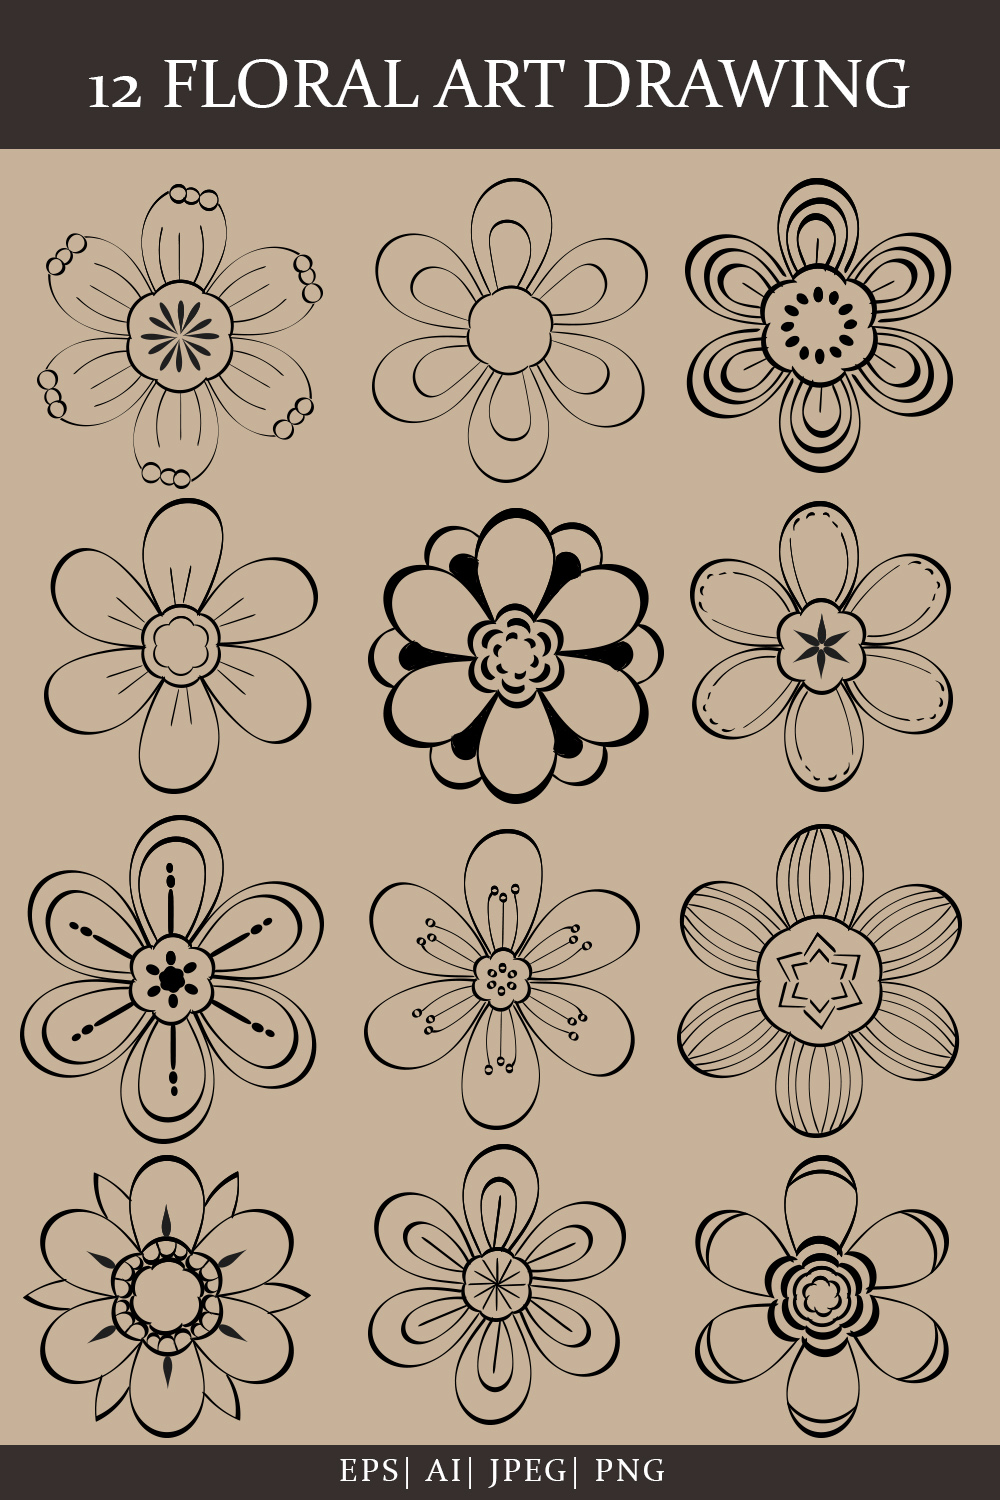 Floral Art Drawing With Line-Art pinterest image.